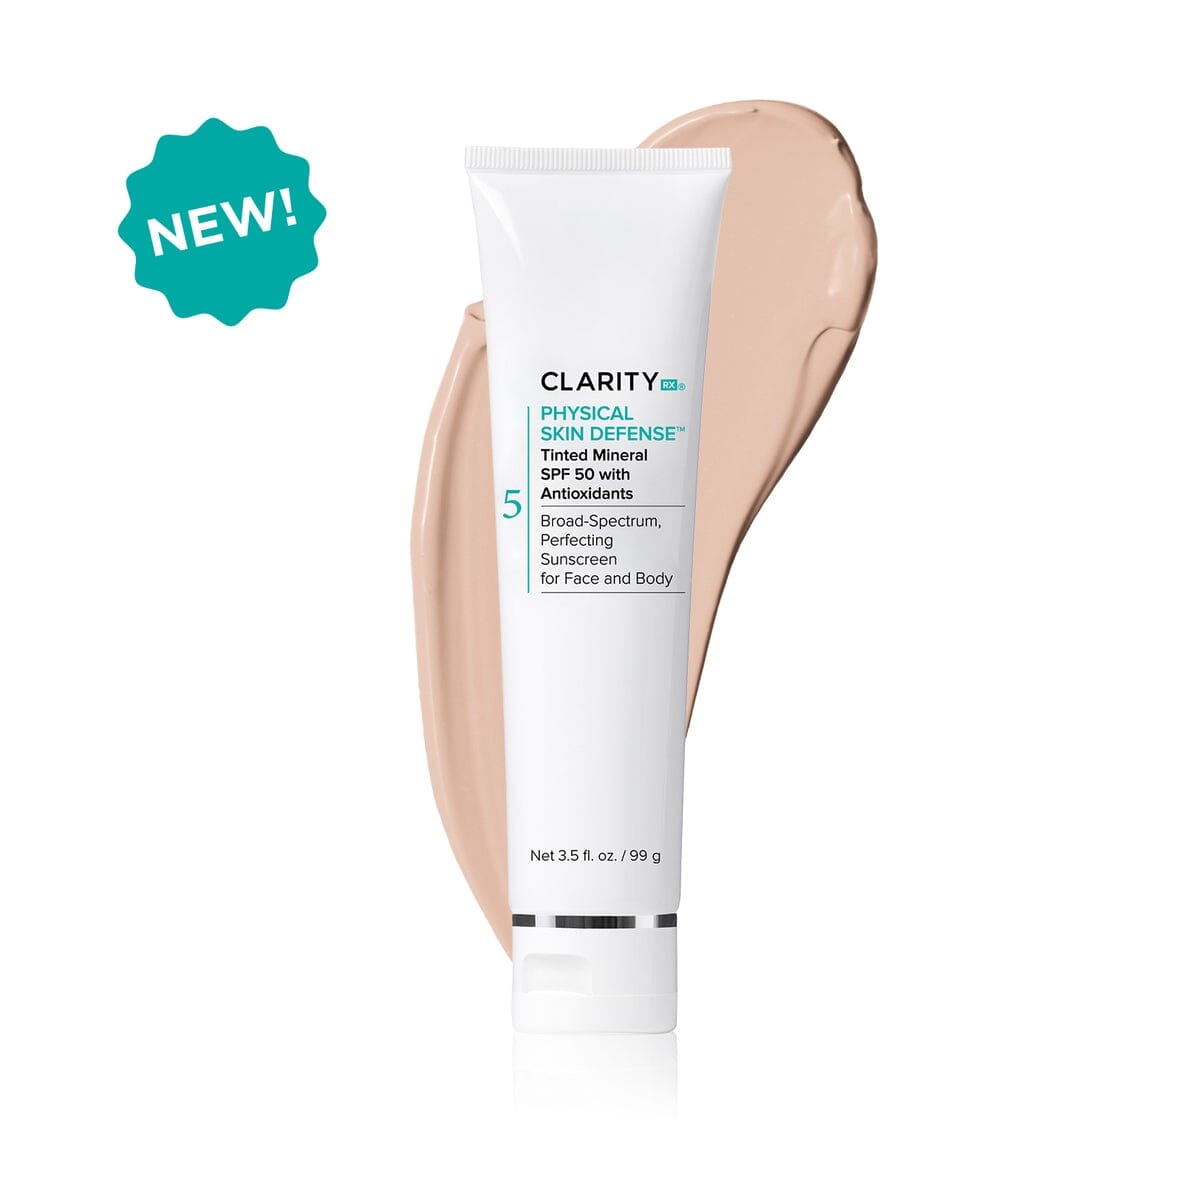 ClarityRx Physical Skin Defense Tinted Mineral SPF 50 ClarityRx 3.5 oz. Shop at Exclusive Beauty Club